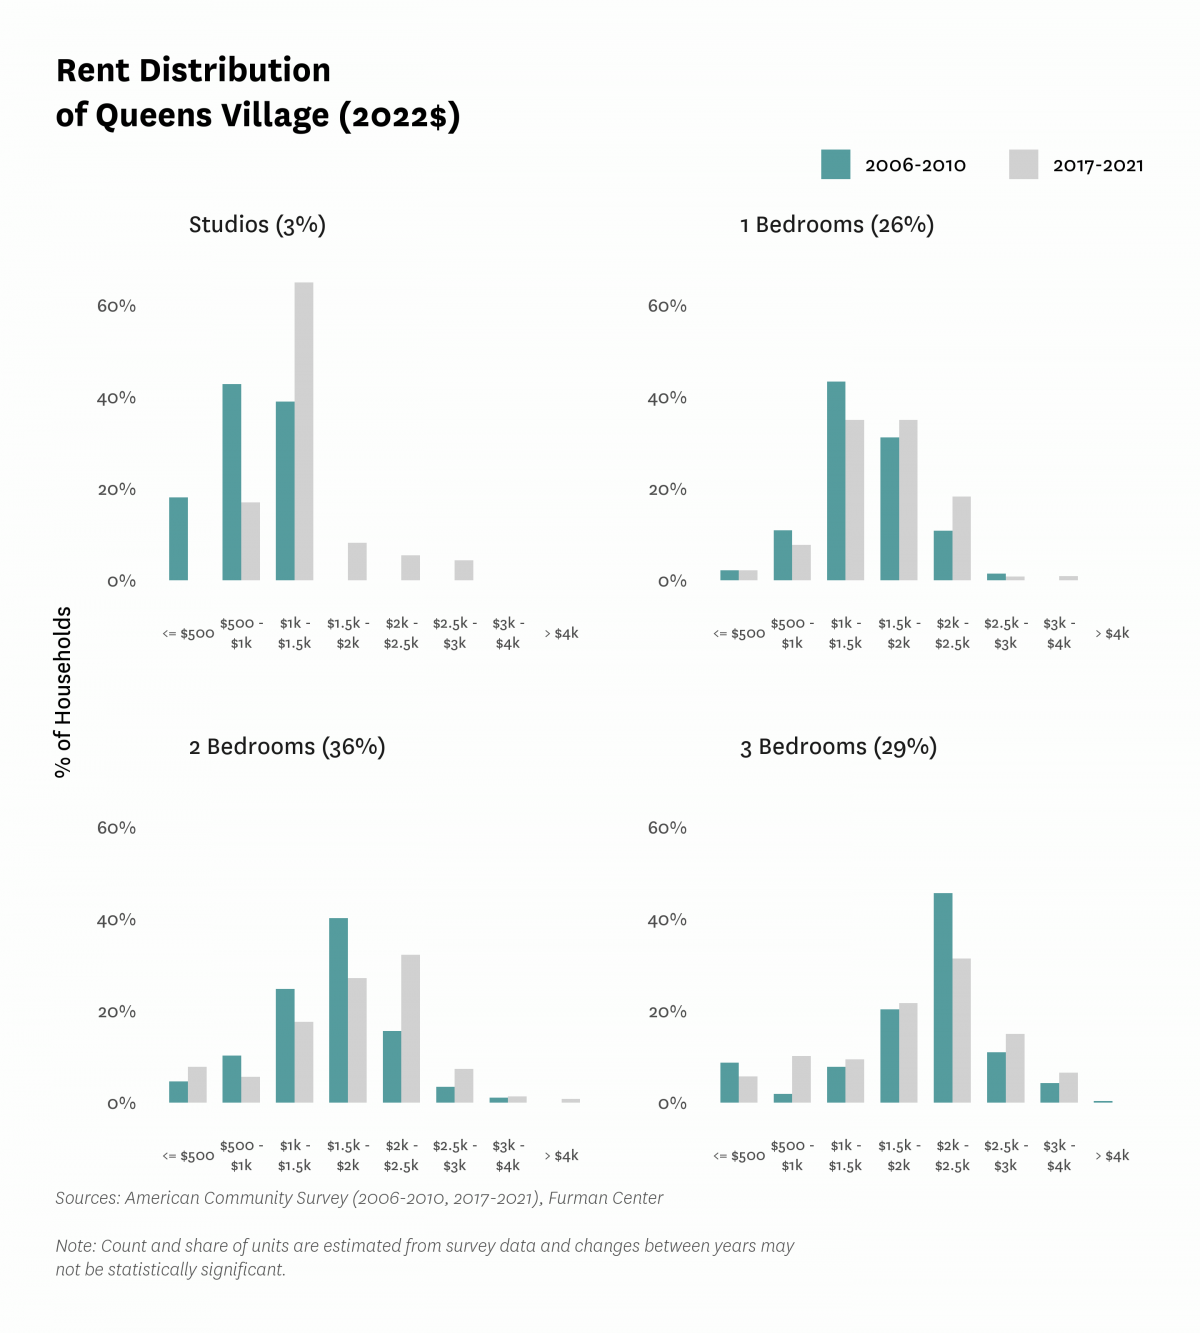 Graph showing the distribution of rents in Queens Village in both 2010 and 2017-2021.